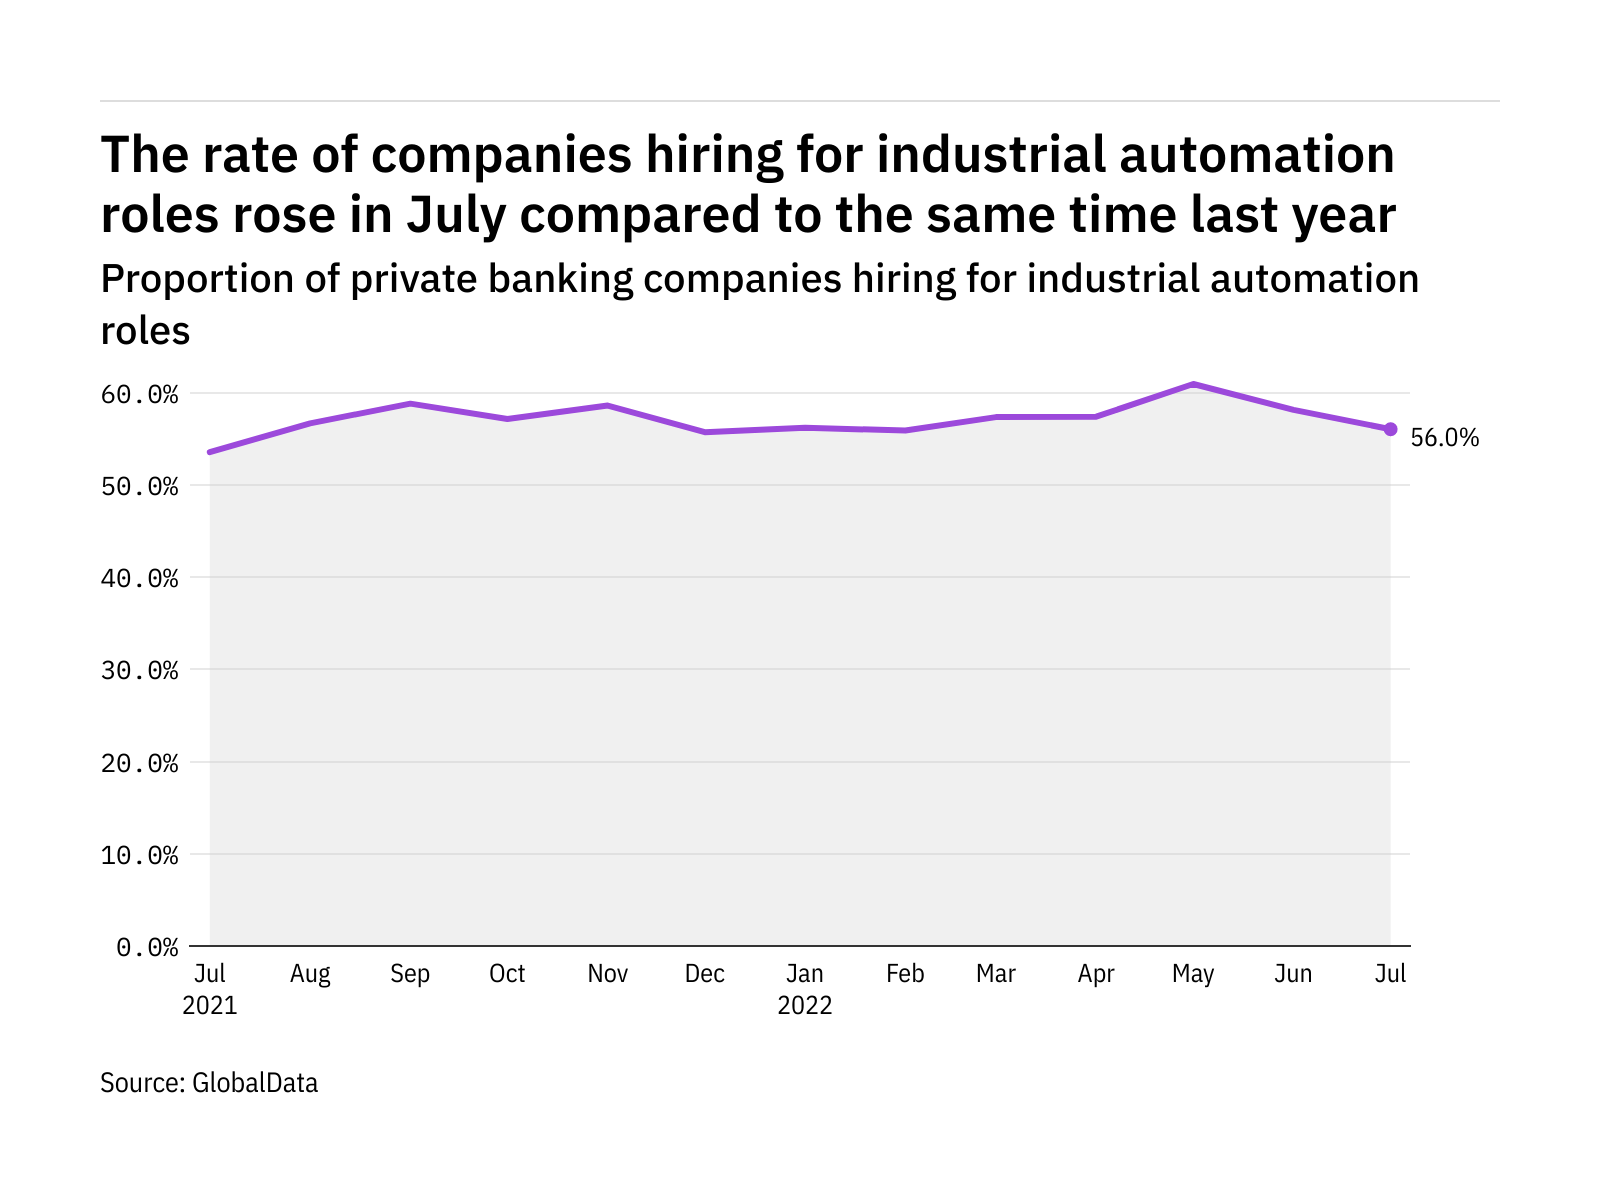 Industrial automation hiring levels in the private banking industry rose in July 2022